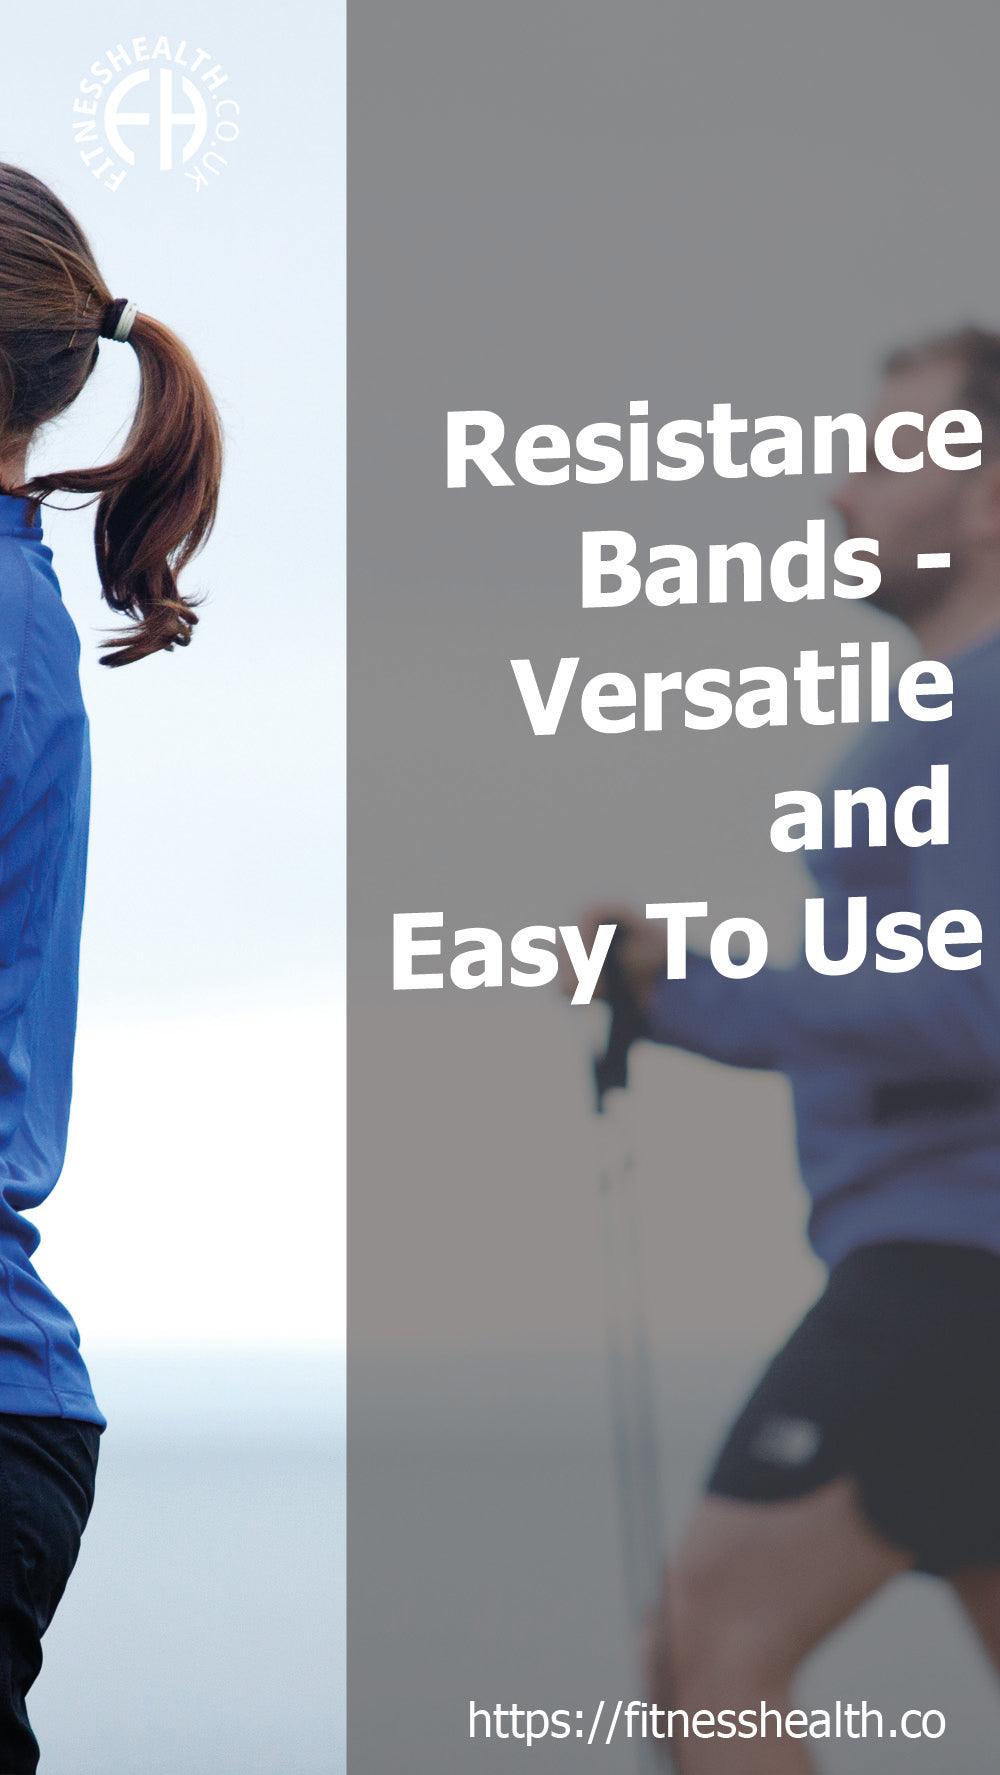 Resistance Bands - Versatile and Easy To Use - Fitness Health 